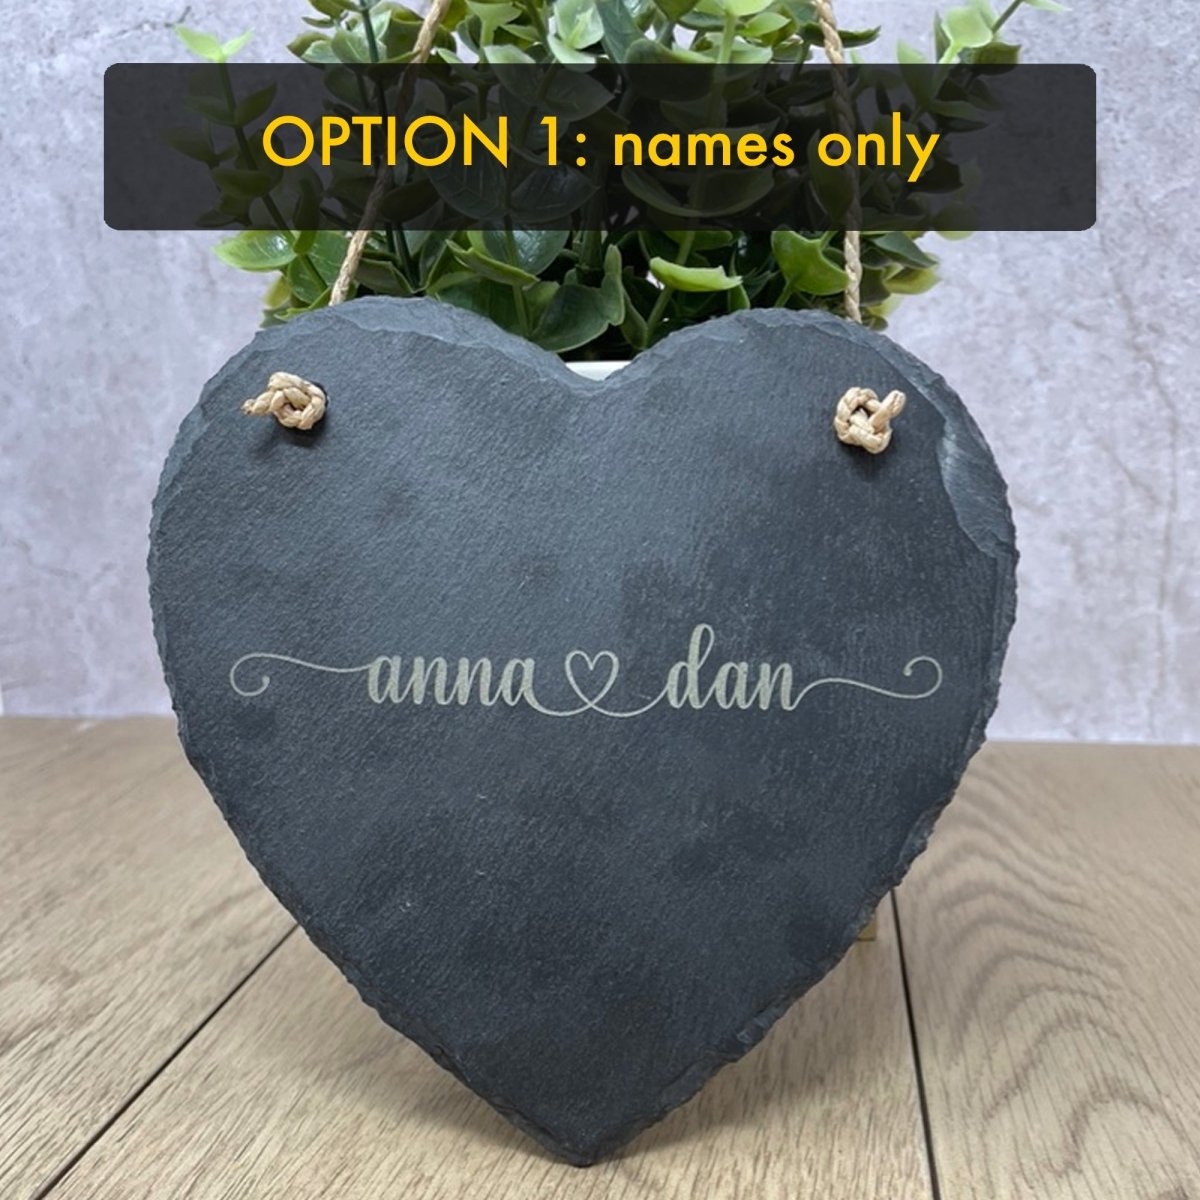 Personalised Slate Plaque Heart Shaped Plaque Engraved Valentines Gift 15x15cm Personalised 1. Names  Accessories Gifts UK